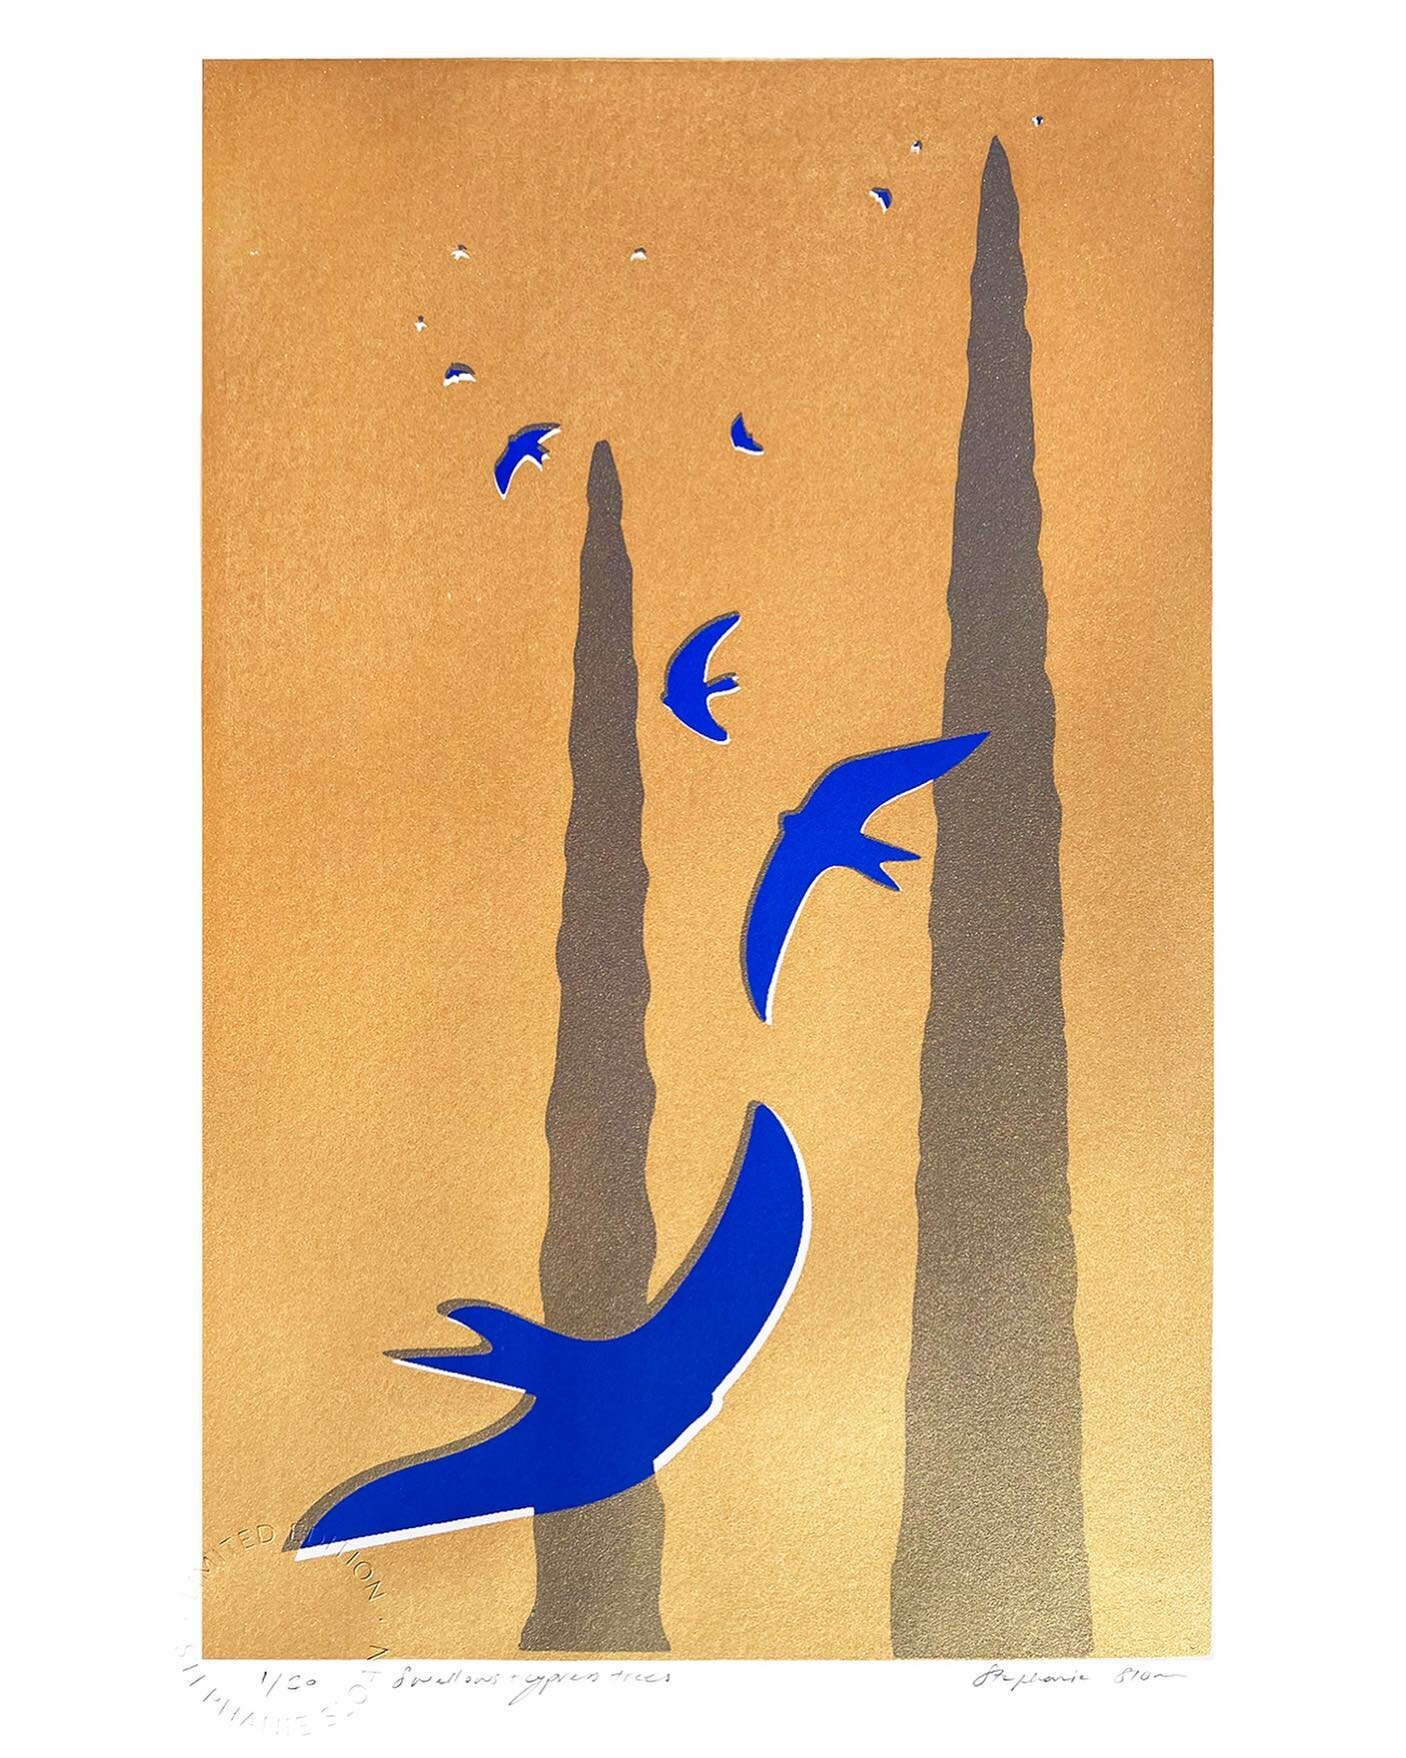 Swallows and Cypress trees. New screen print just added to my website in an edition of 20. 
Approx A3 size in two colour- shimmering gold and cobalt blue. 

A memory of last summer in France.. warm evenings .. swallows diving close and flying high un